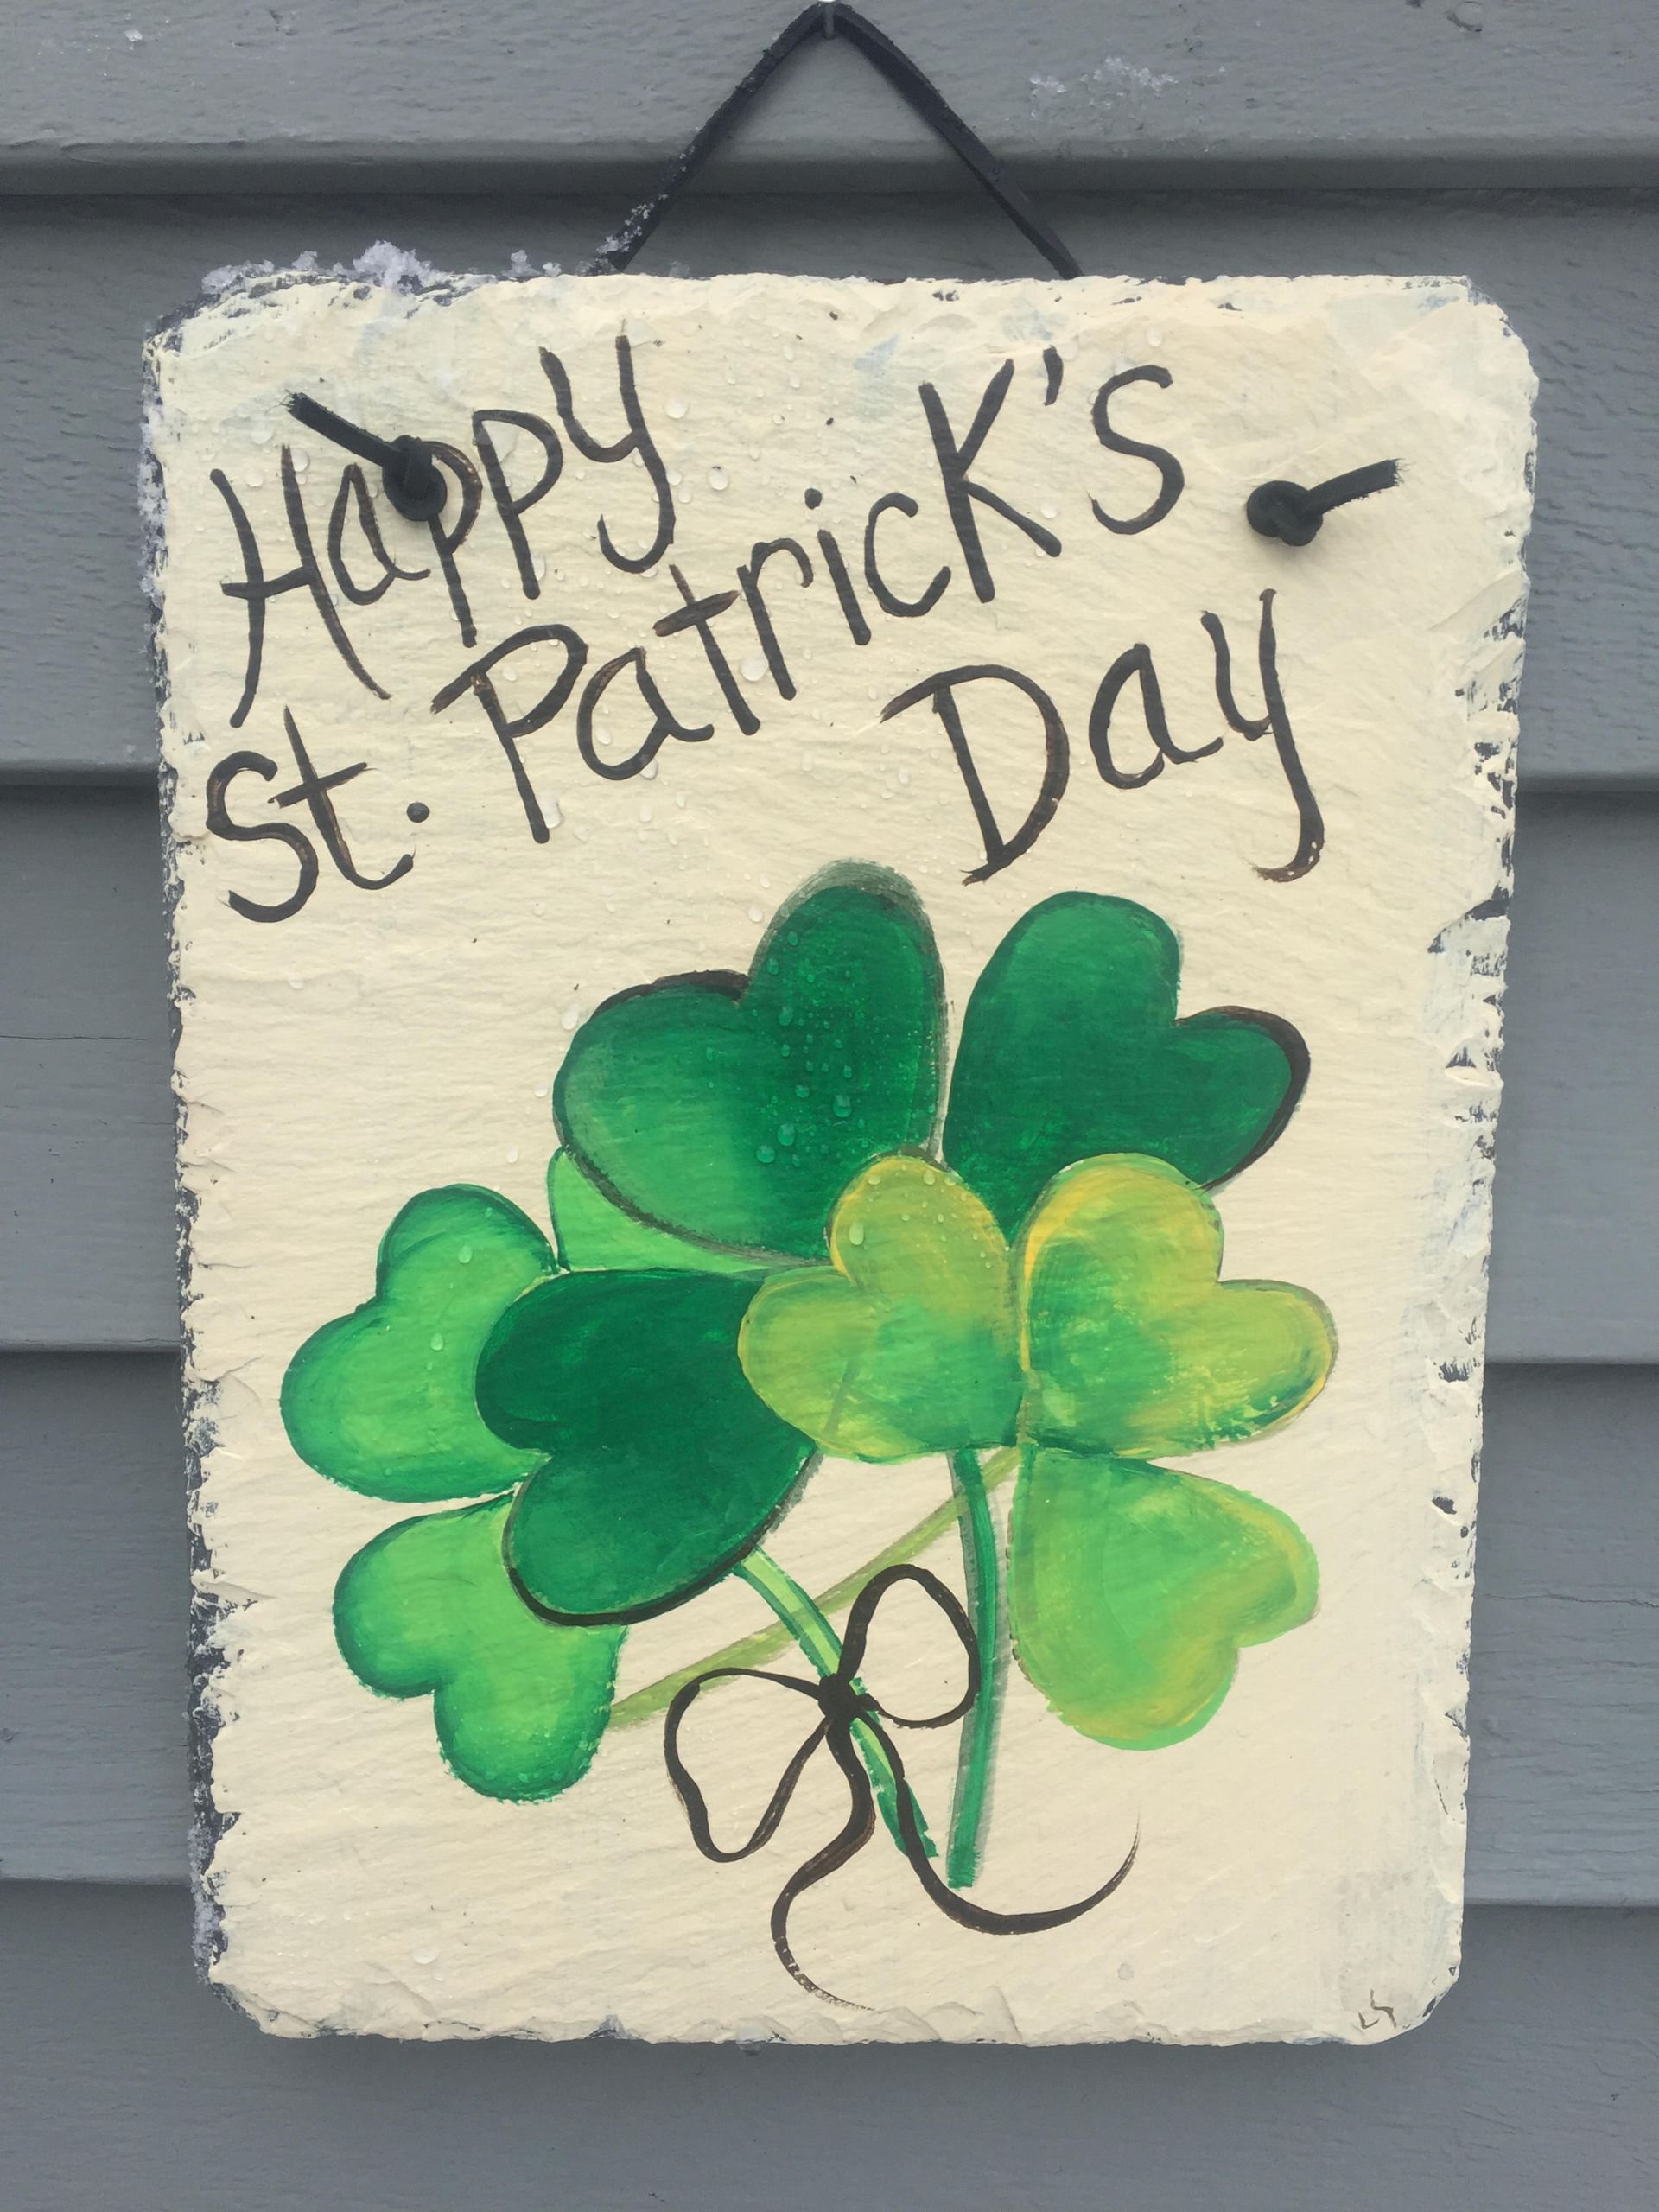 St Patrick's Day Activities Near Me
 St Patricks Day Slate door hanging St Patty s Day